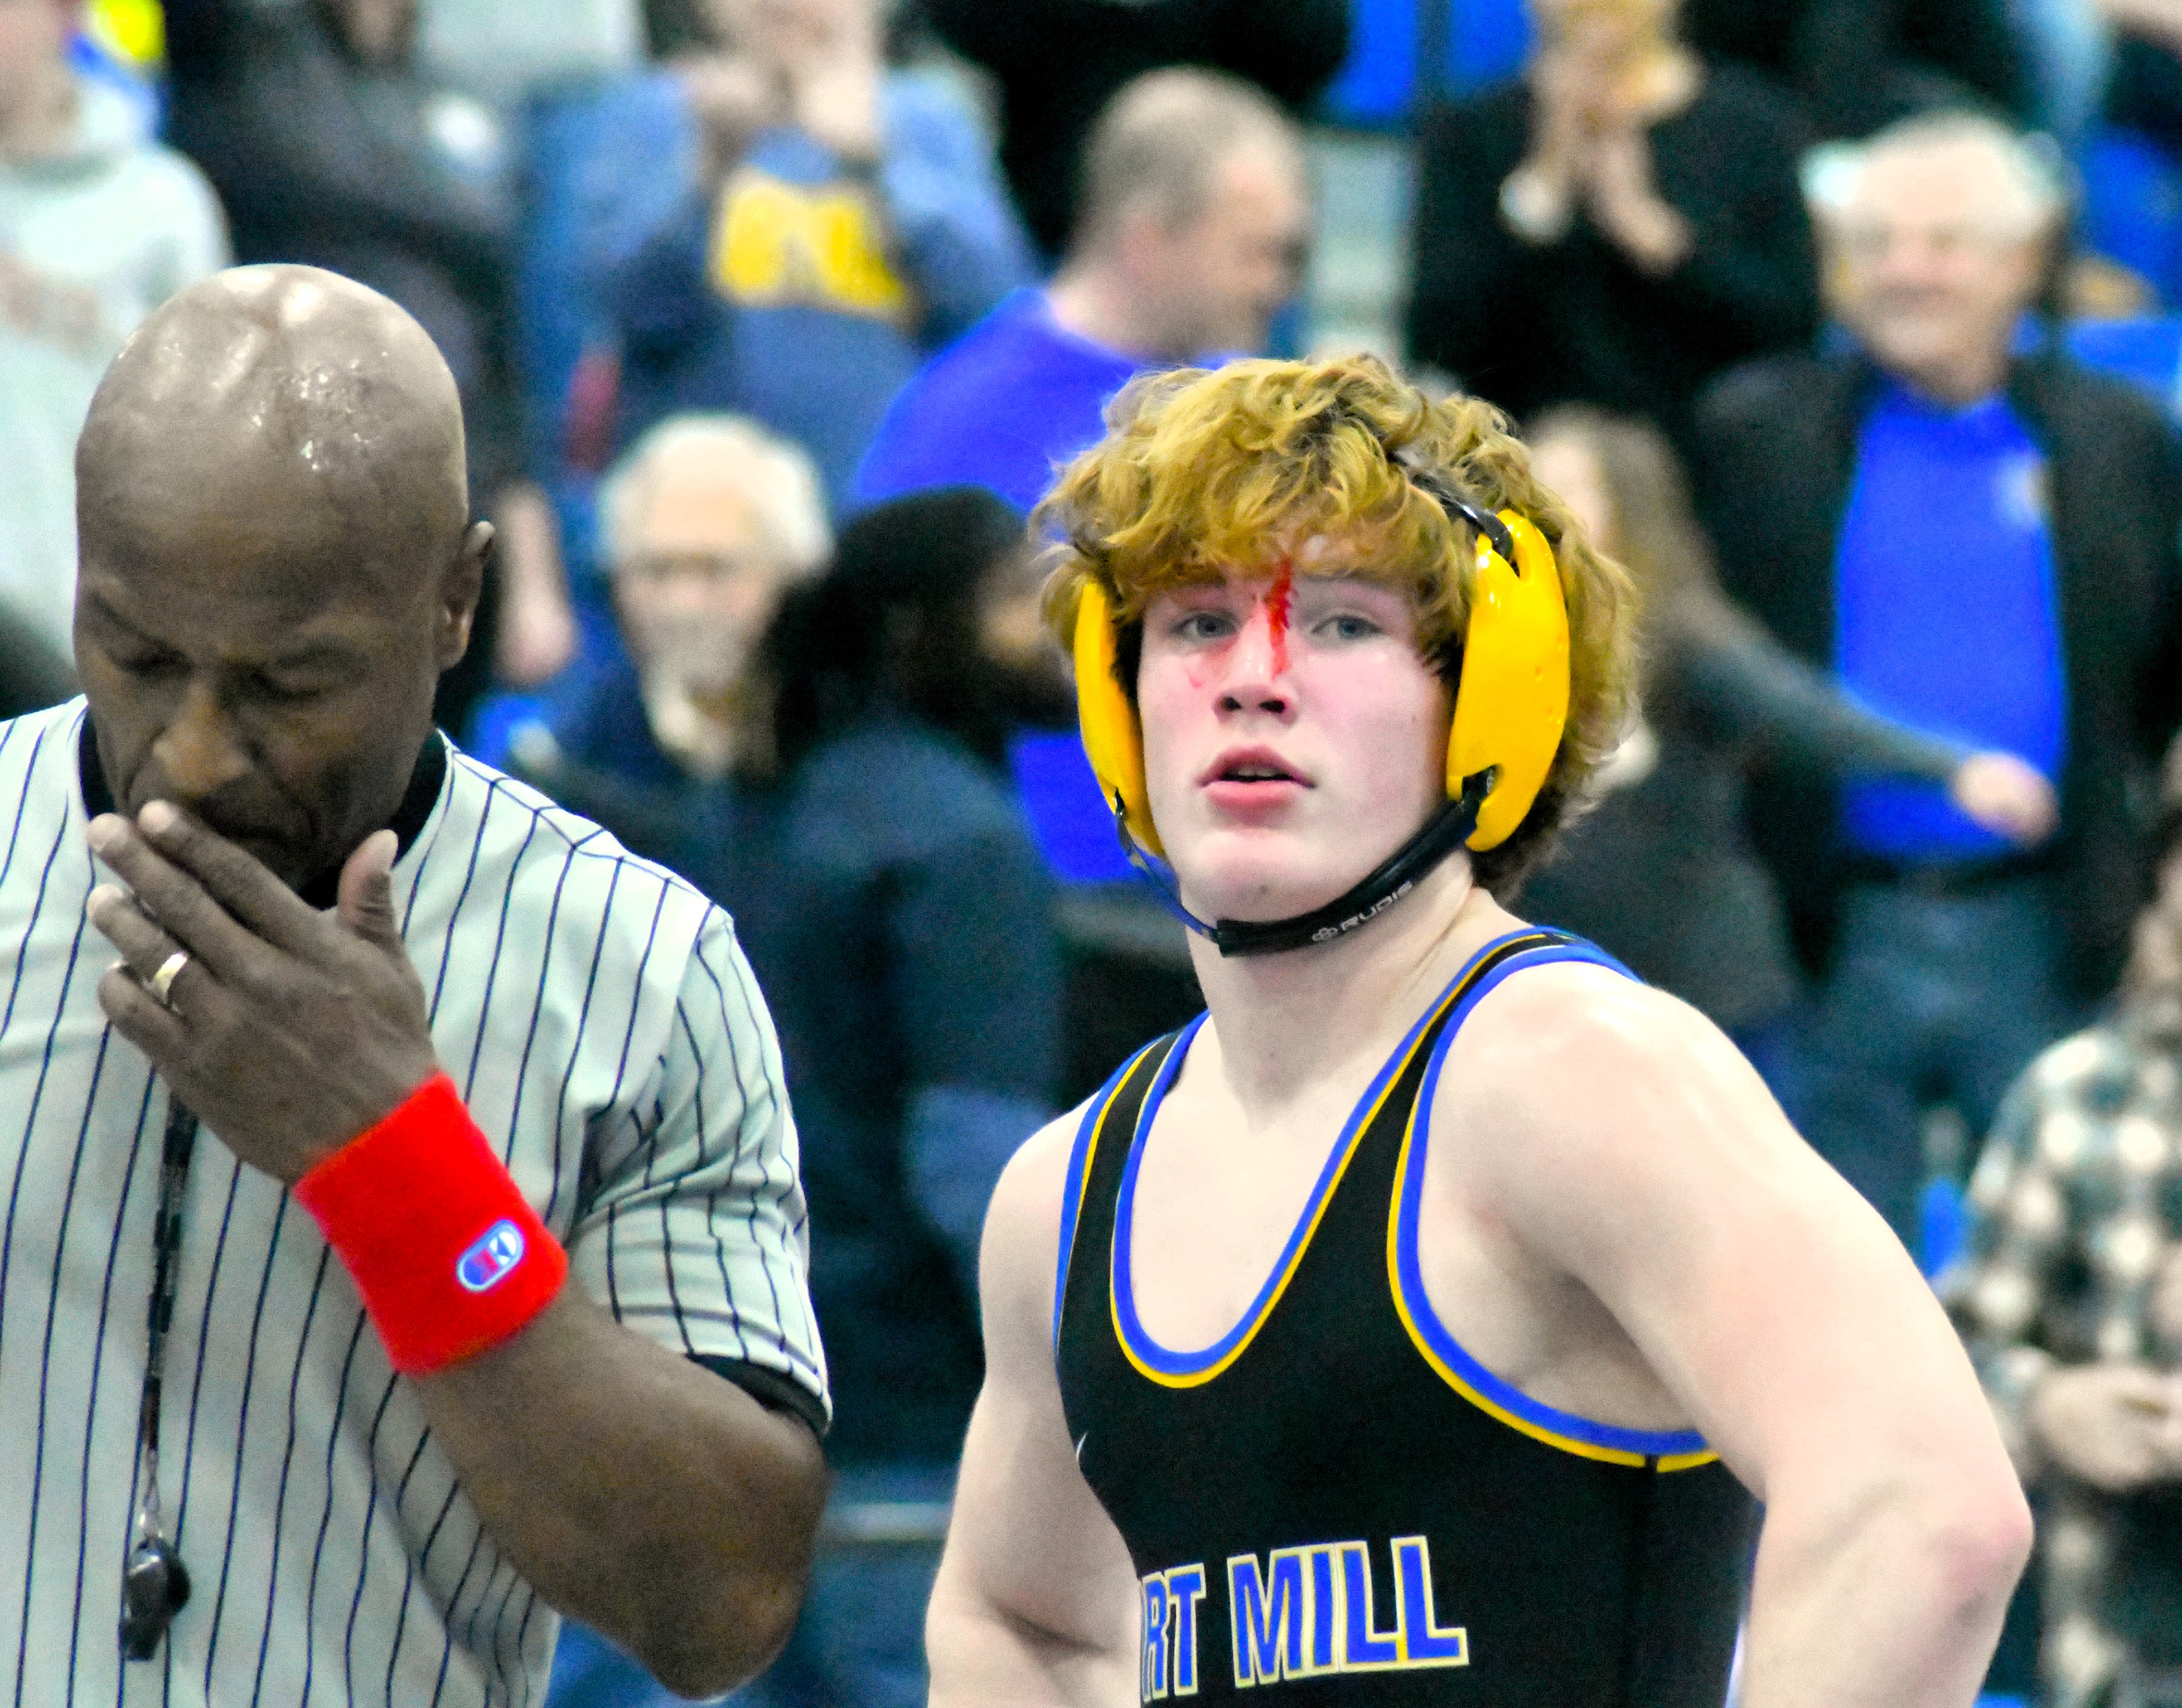 Fort Mill returning to 5A state wrestling championship